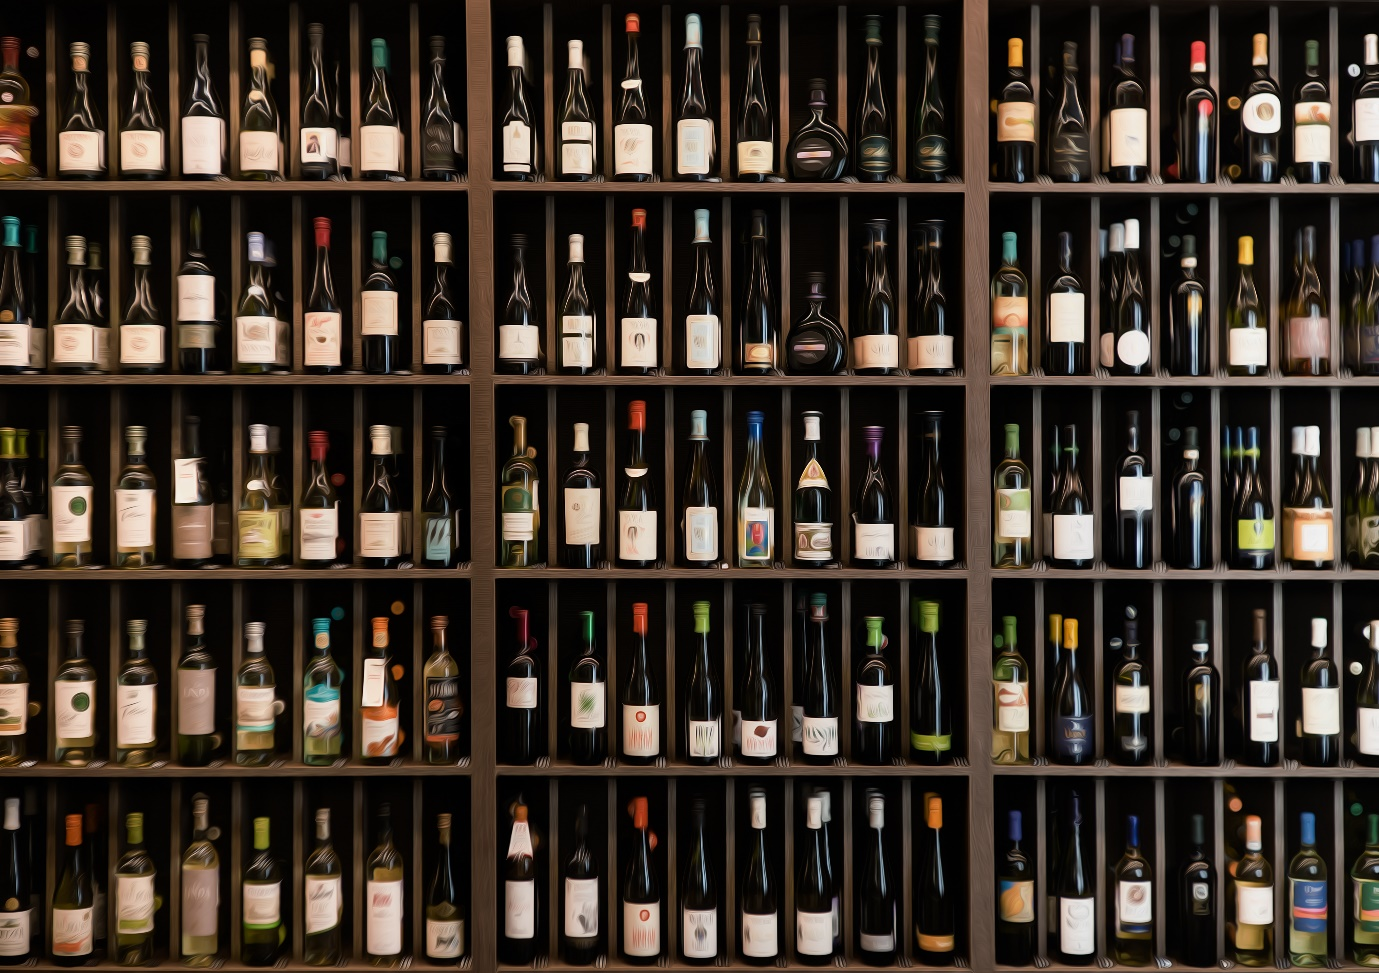 A collection of wine bottles